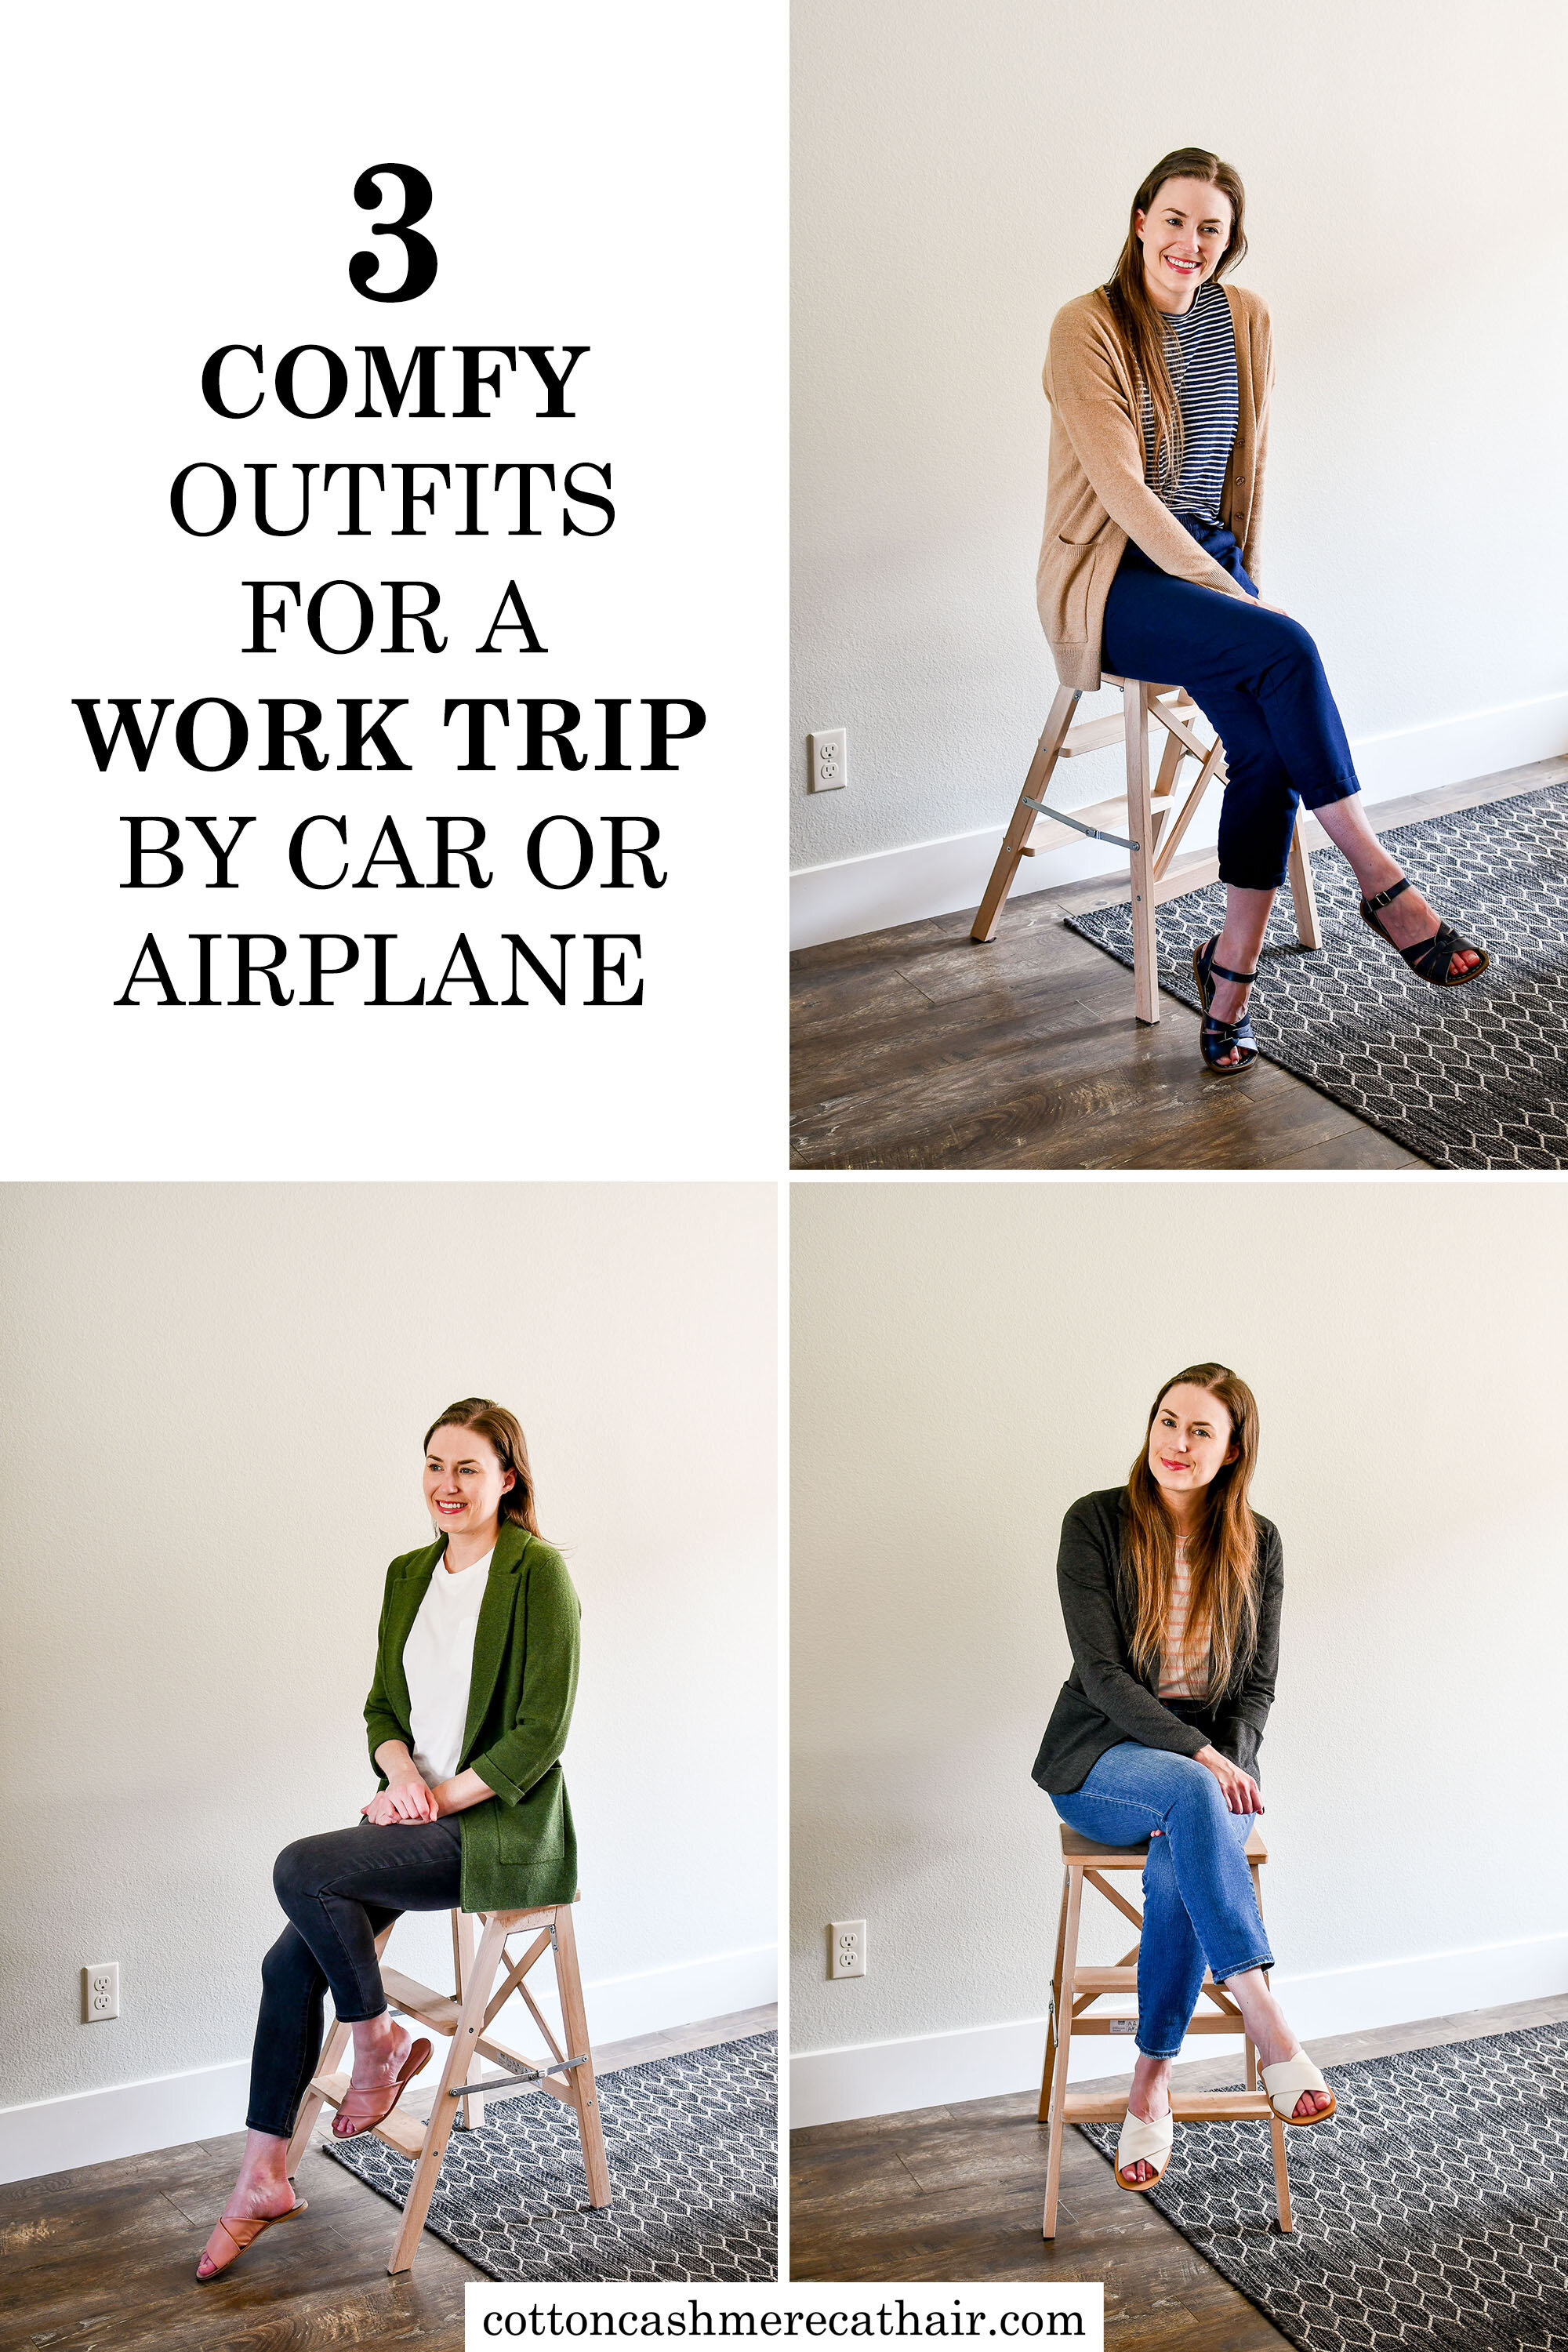 These Are Our Style Tips And Outfit Ideas For Your Next Trip